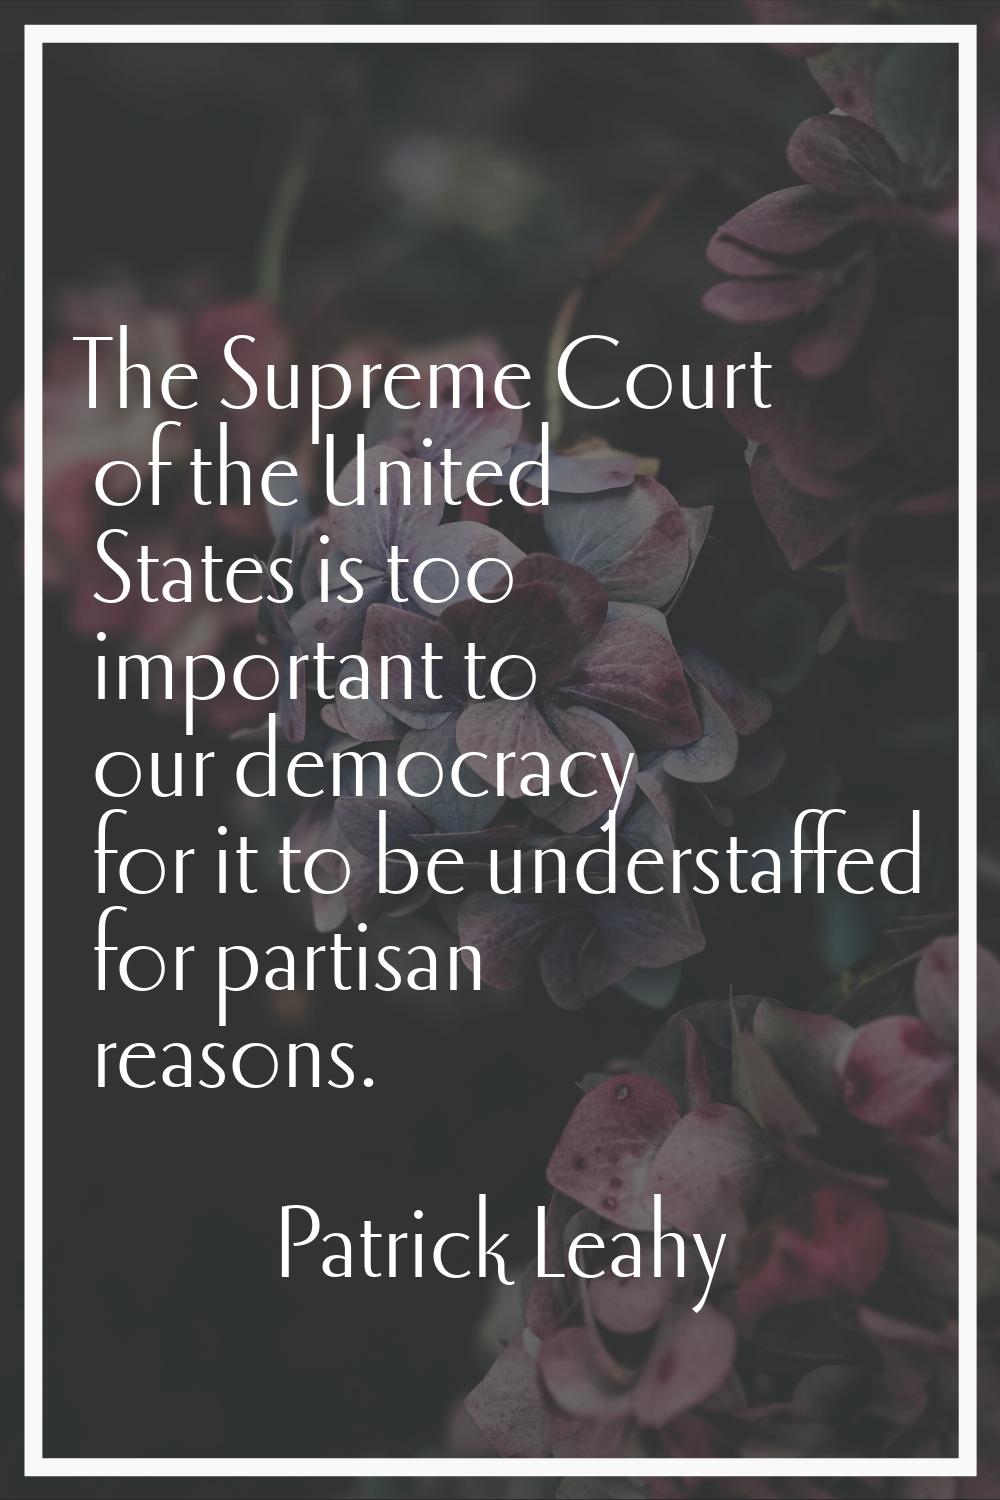 The Supreme Court of the United States is too important to our democracy for it to be understaffed 